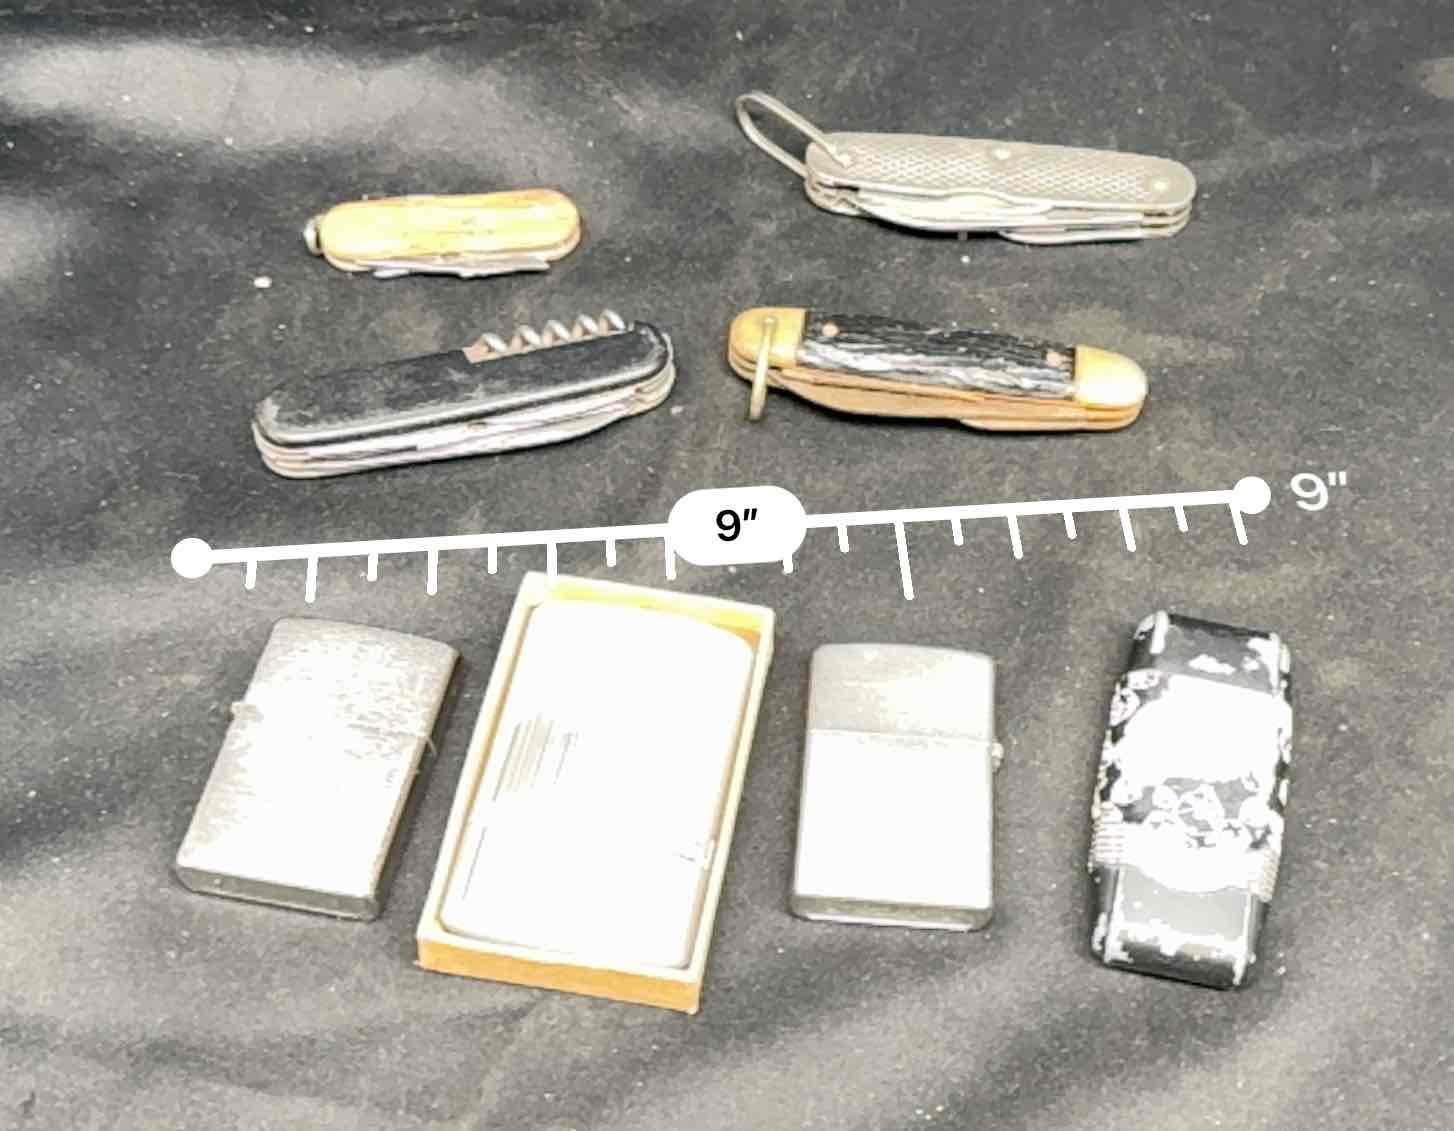 Assorted Pocket Knives and Lighters.